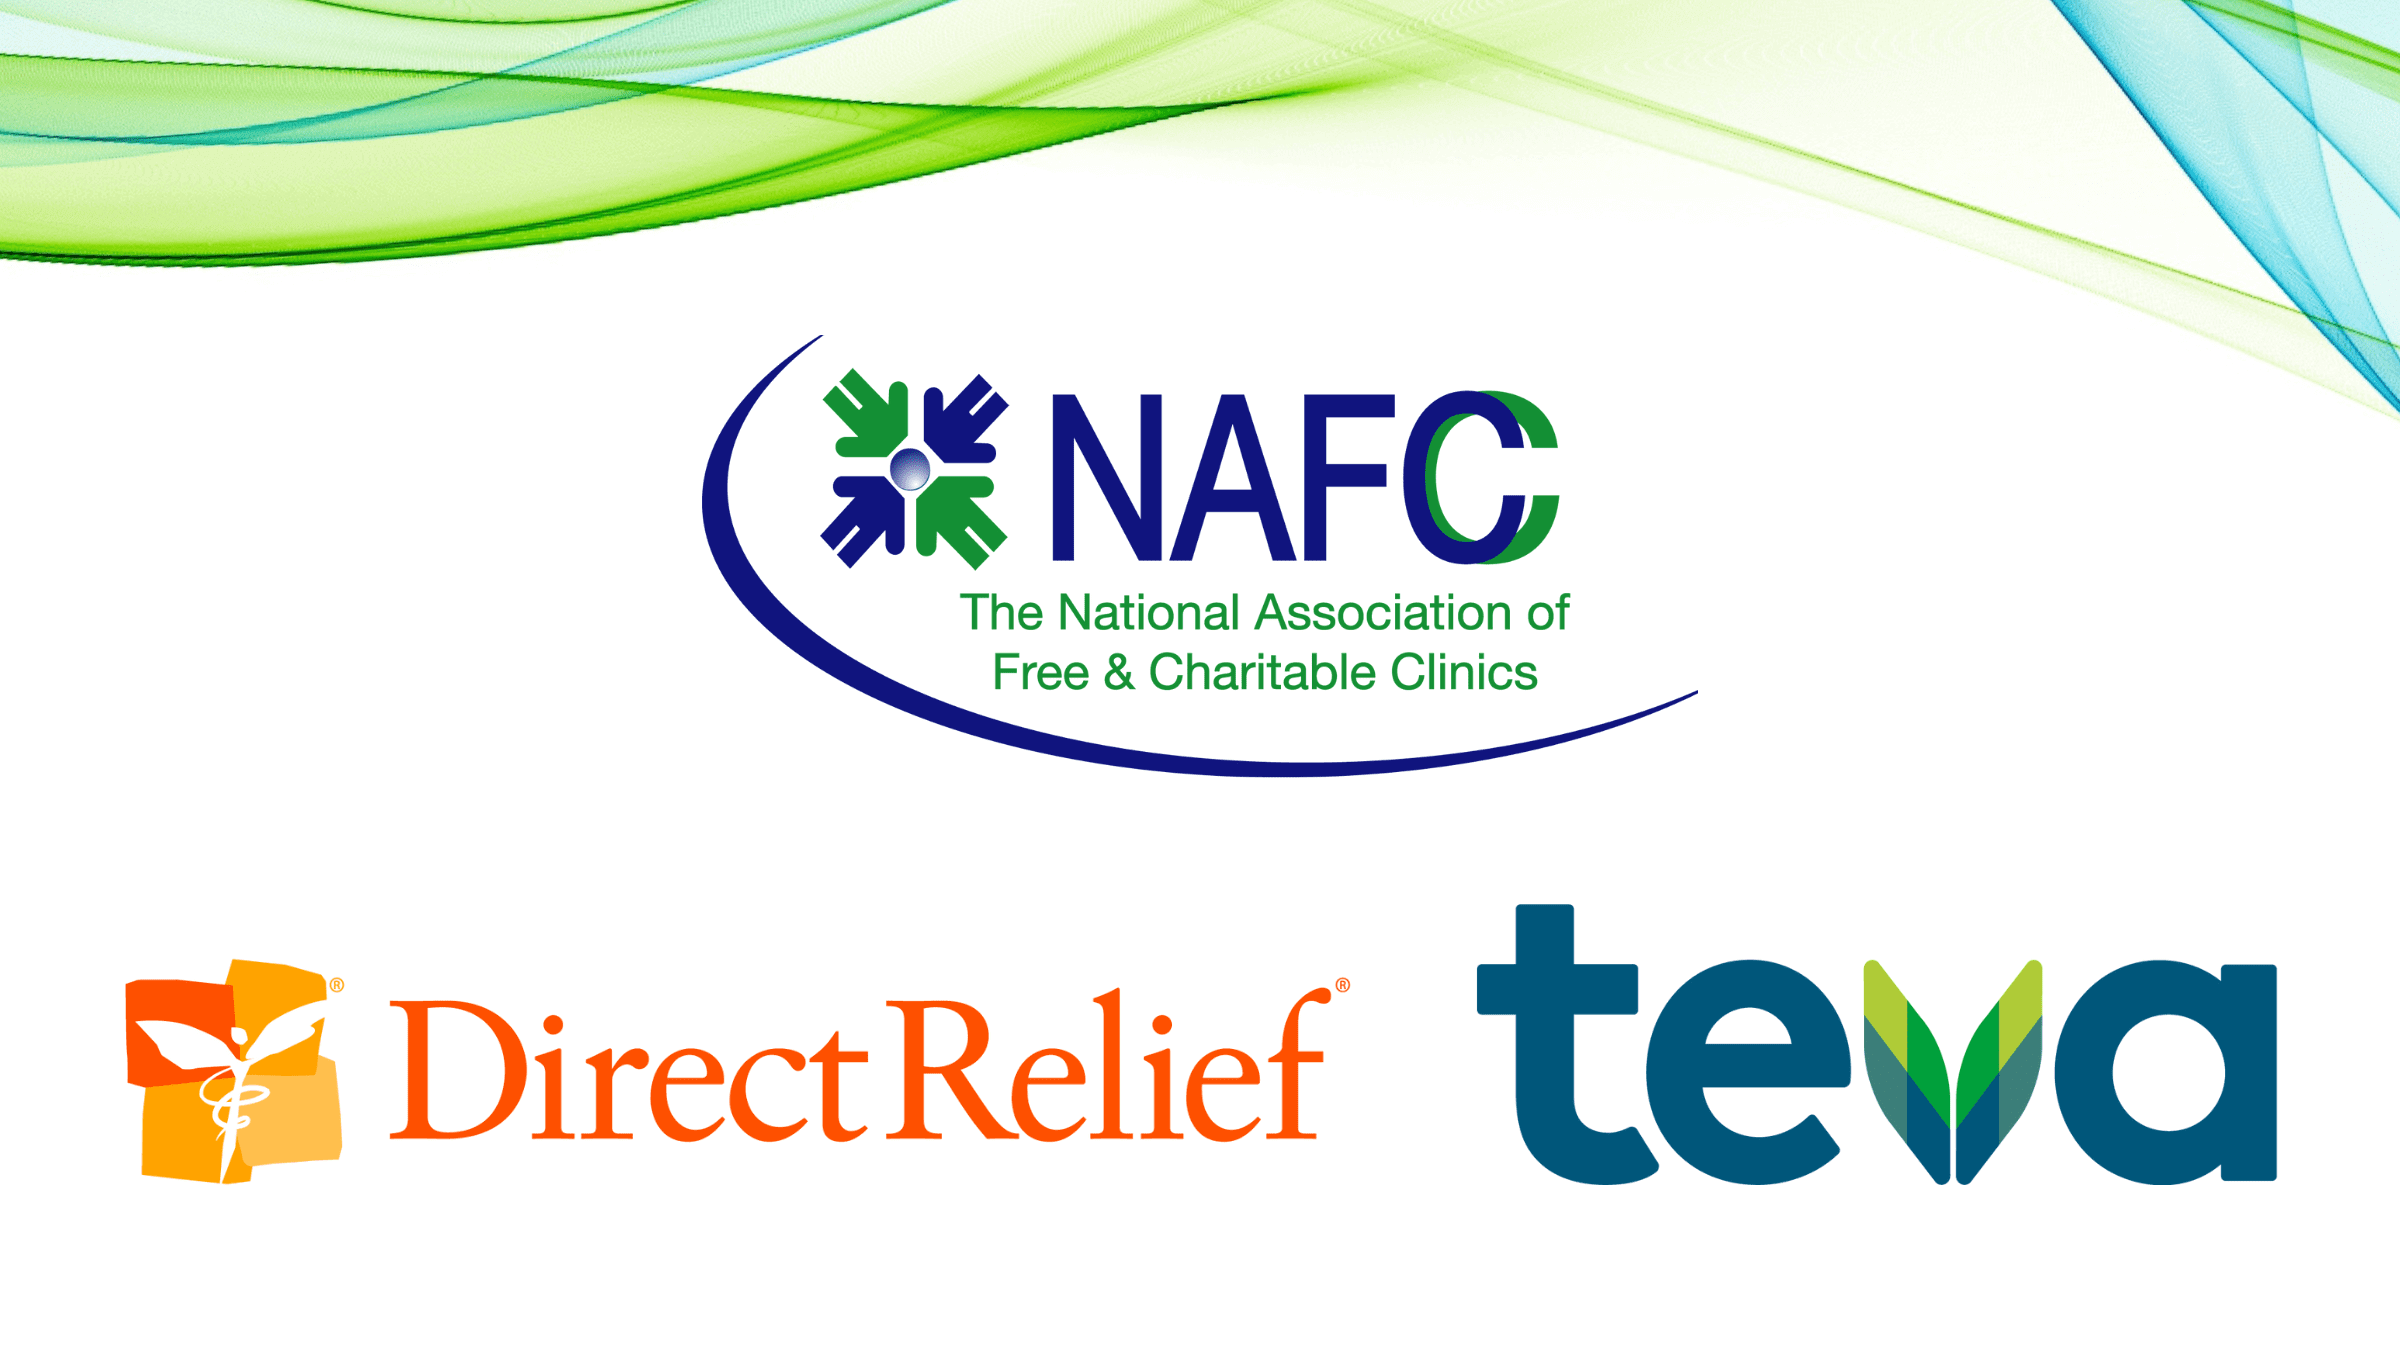 Direct Relief, the National Association of Free and Charitable Clinics and Teva Pharmaceuticals Partner to Advance Access to Behavioral Health Services